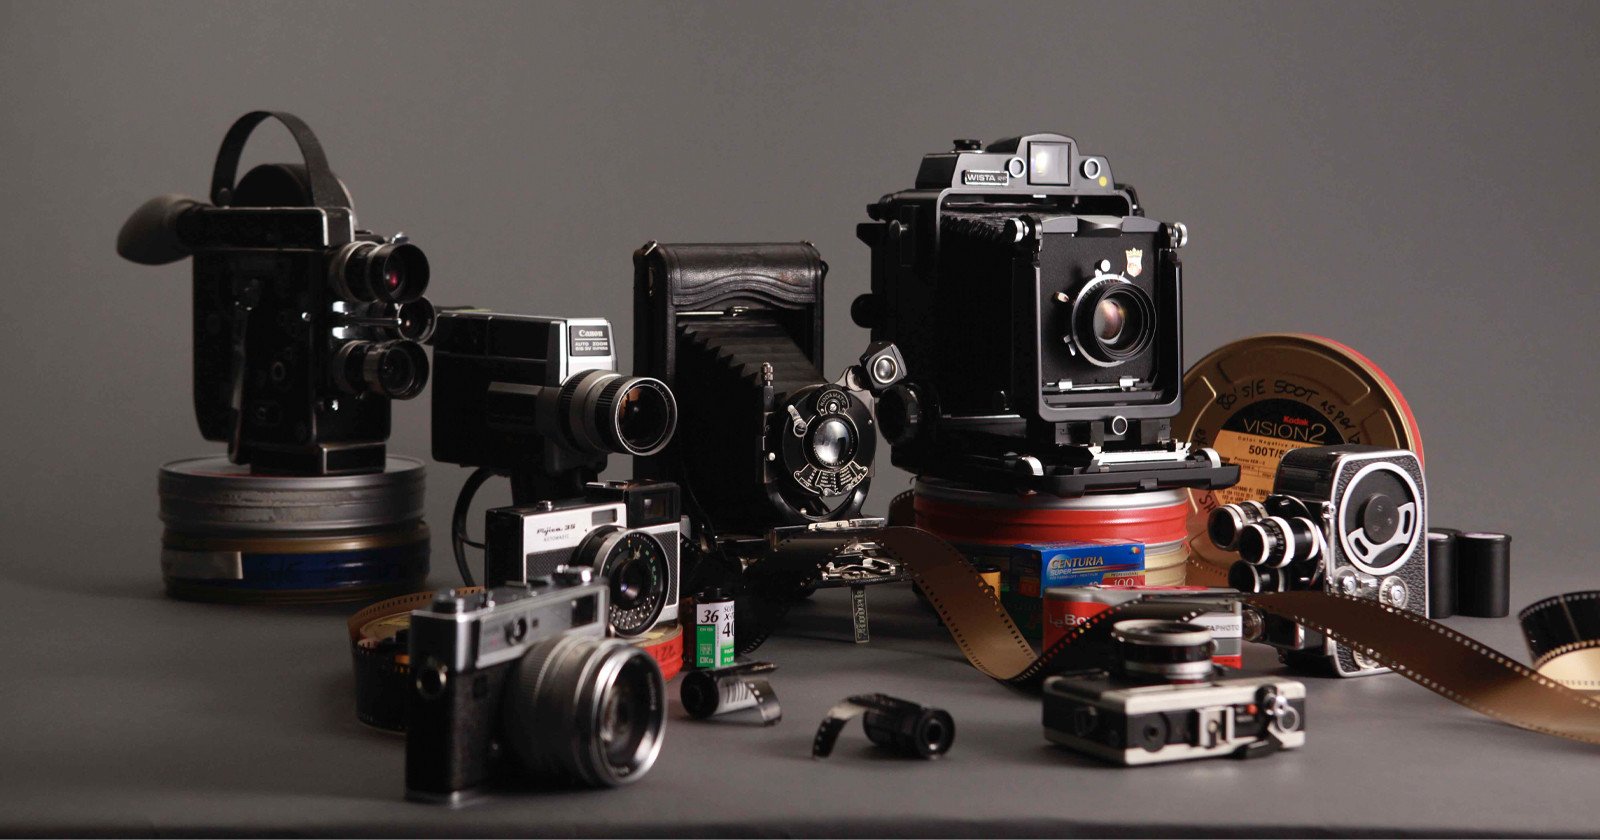 Revival is a Documentary About the Resurgence of Film Photography